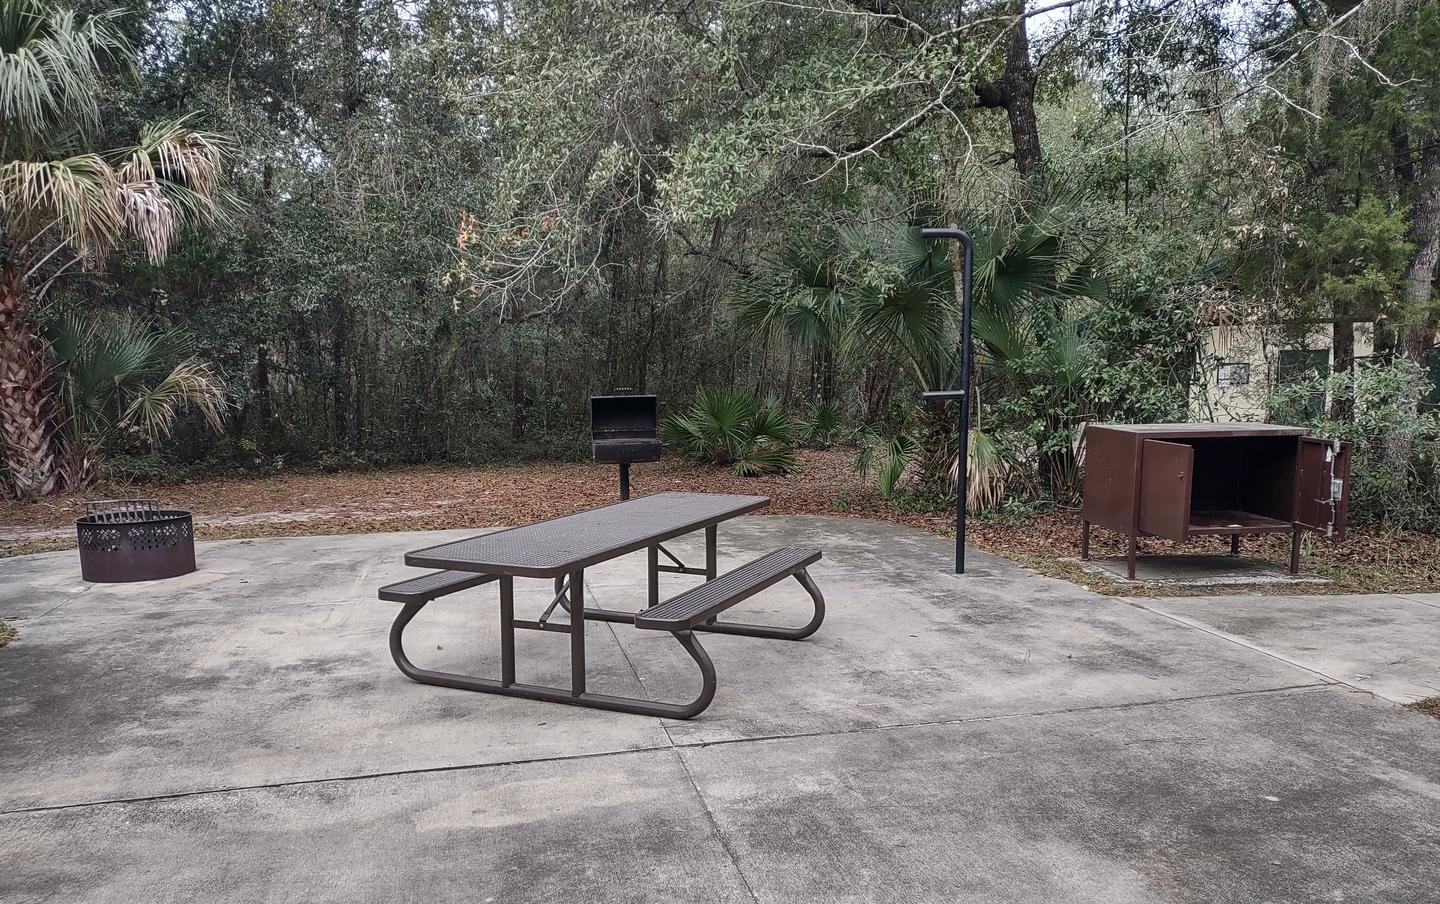 Another view of site 4Amenities pictured: picnic table, fire ring, grill, light pole, bear-proof storage bin